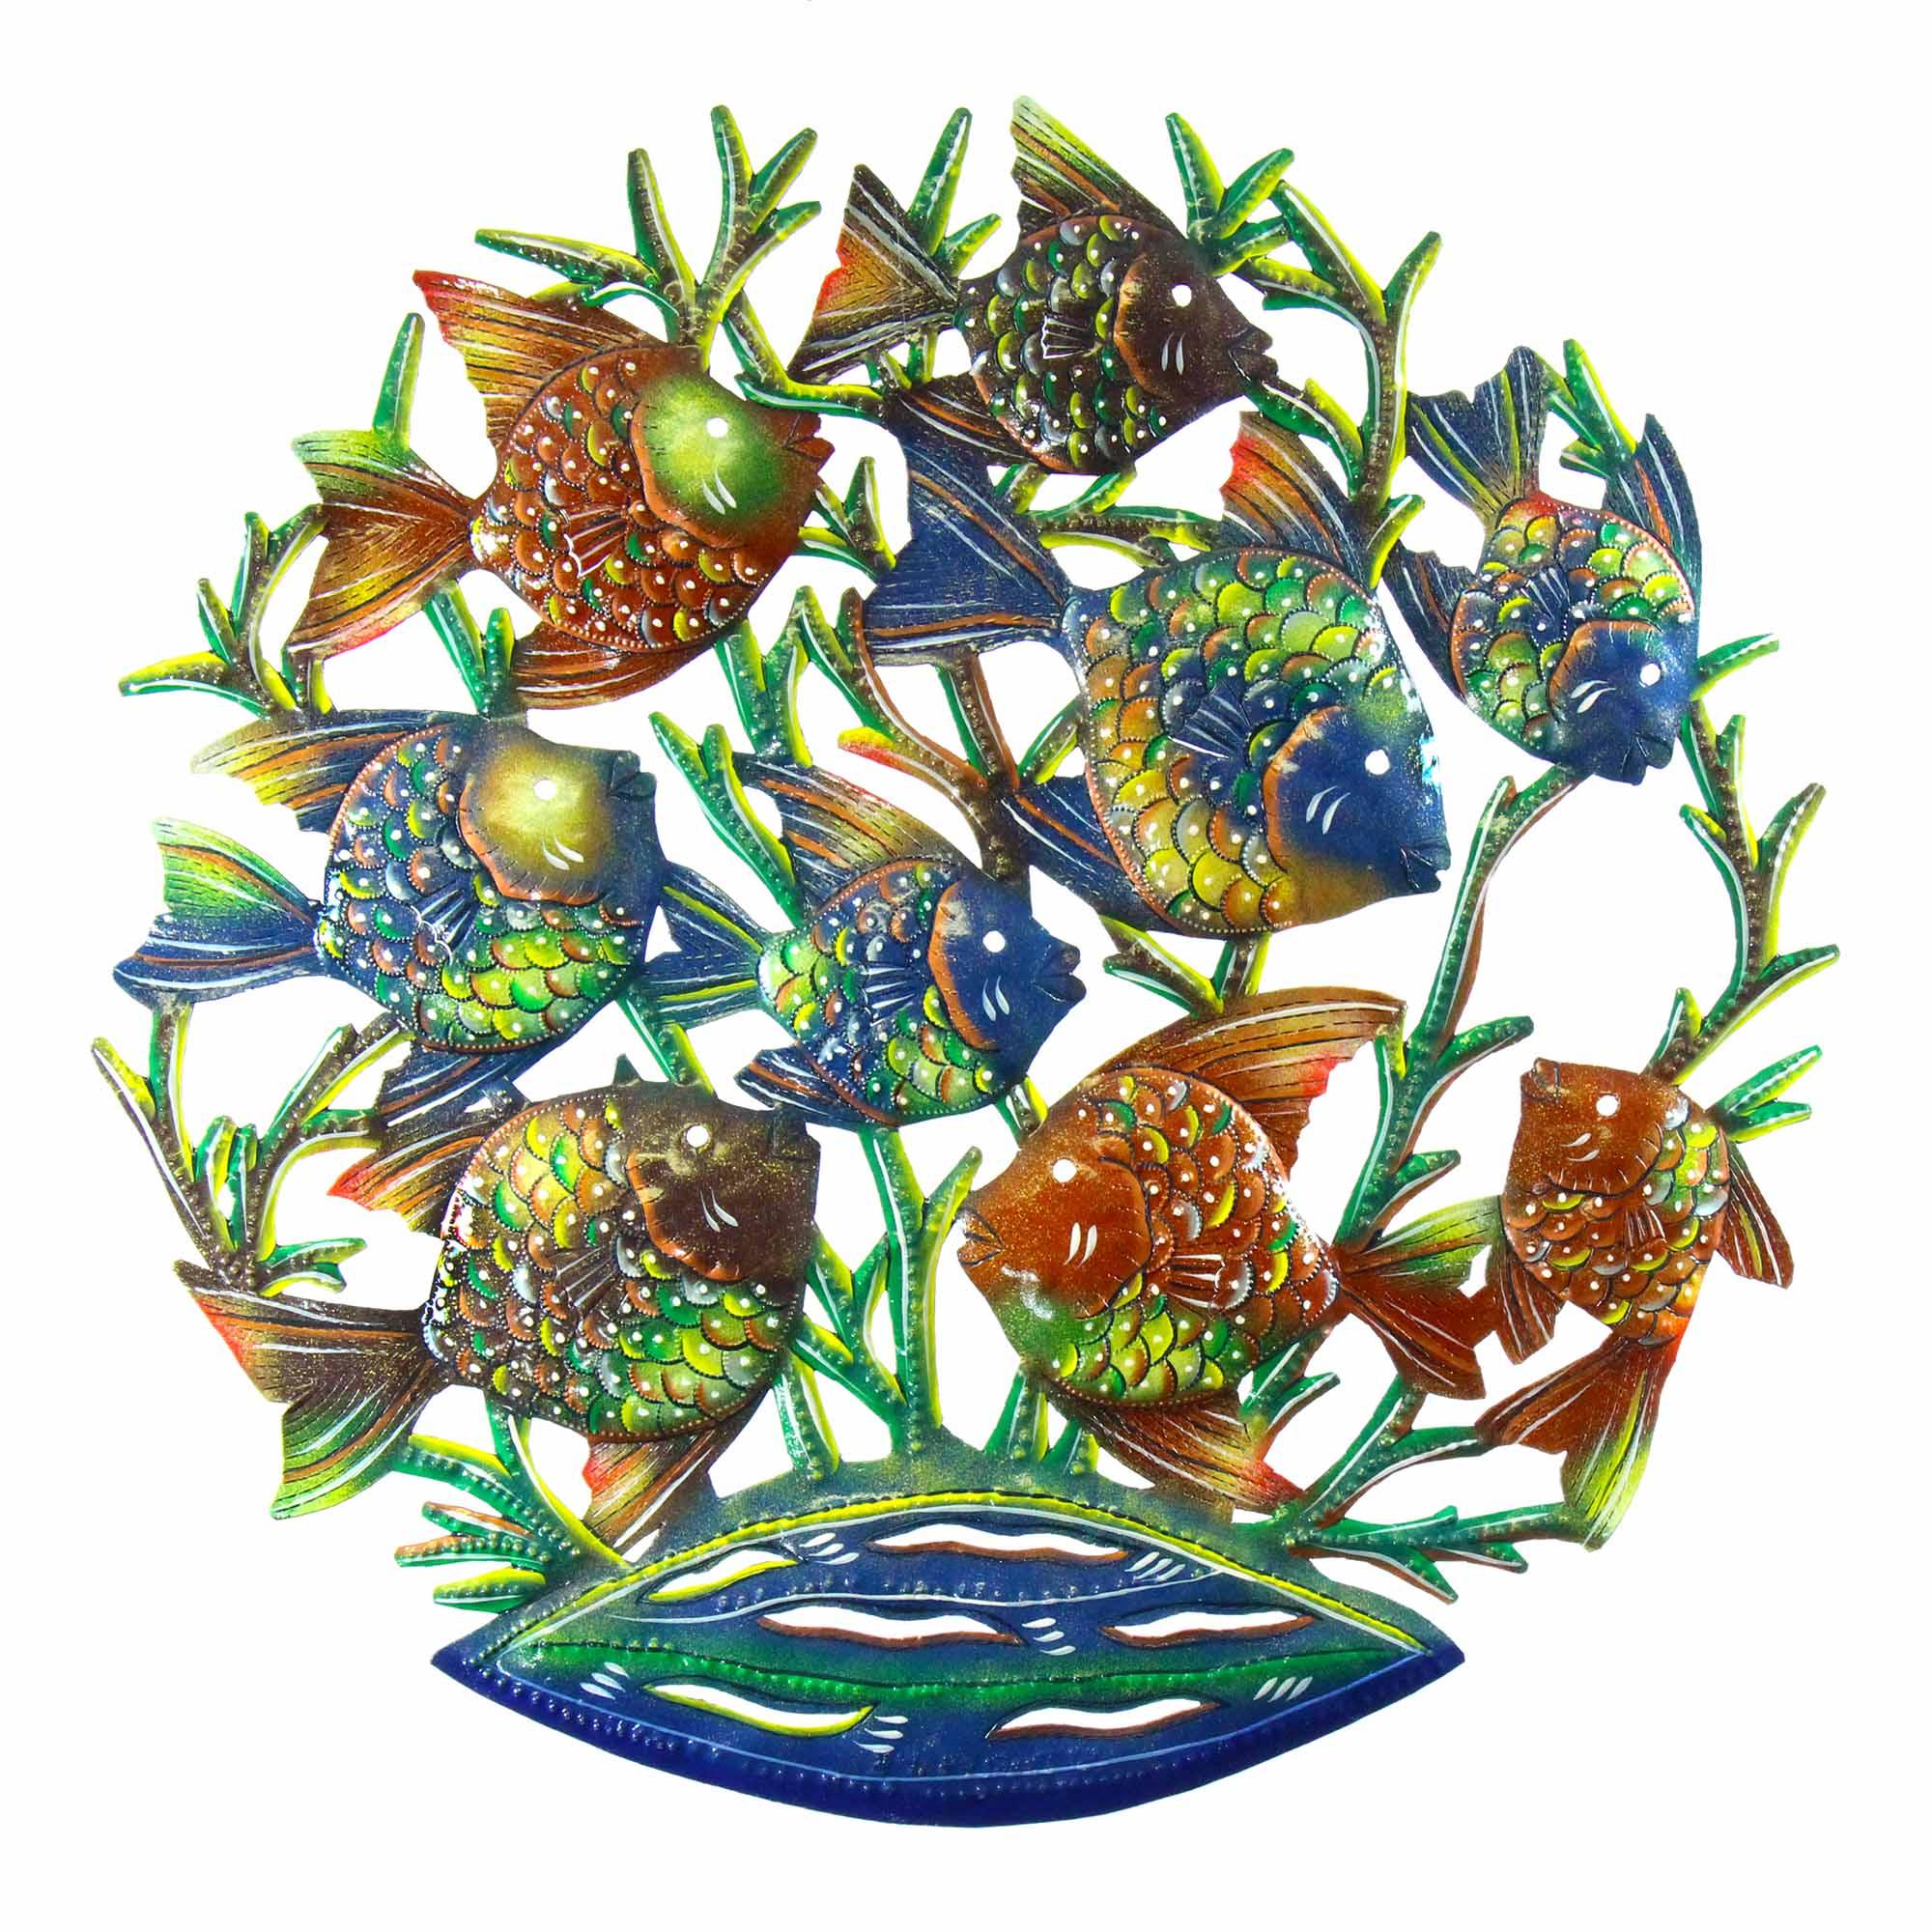 24-Inch Painted School of Fish Metal Wall Art - Croix des Bouquets - Flyclothing LLC